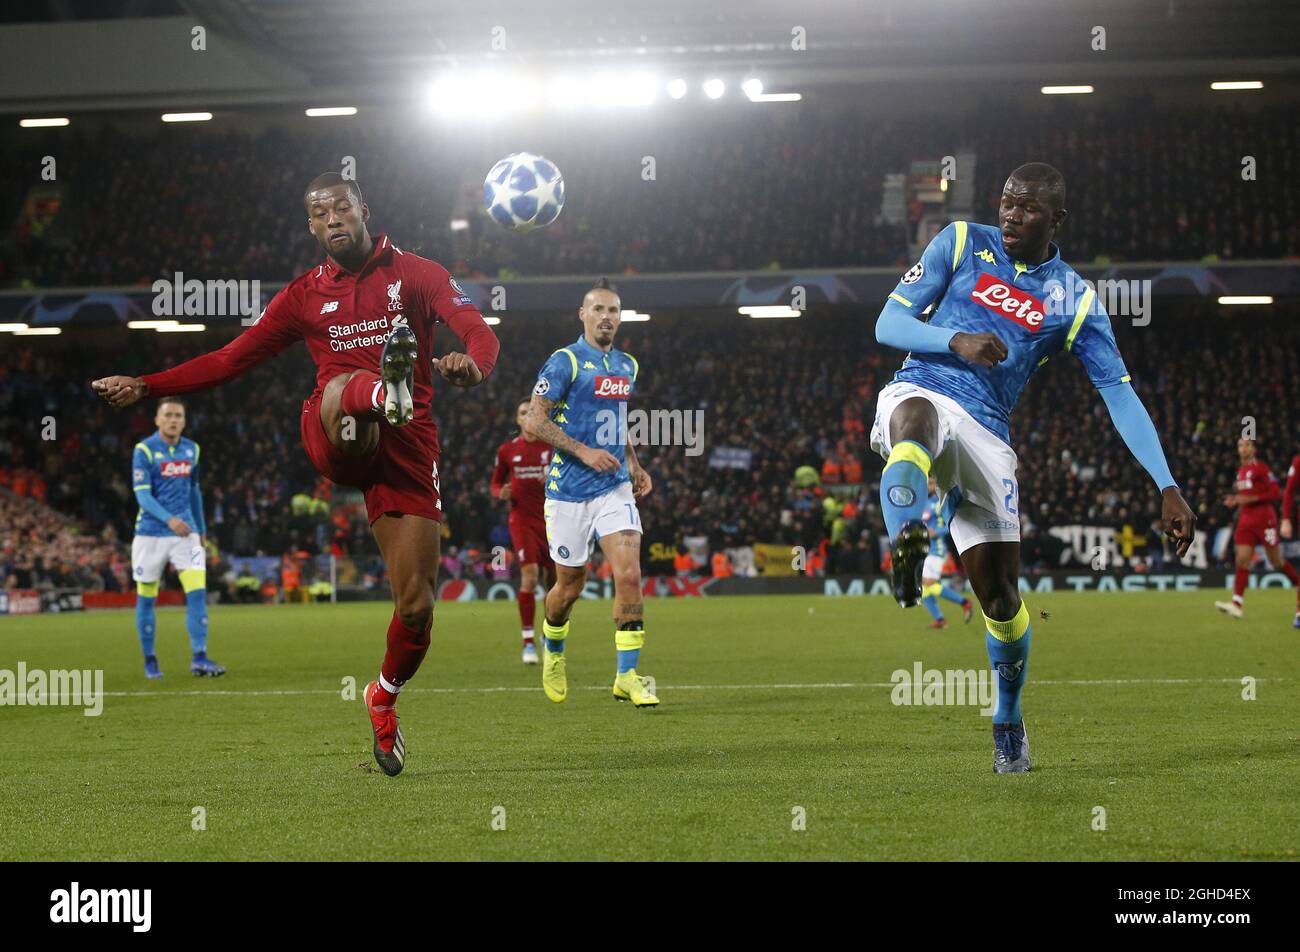 Georgina Wijnaldum of Liverpool lobs the ball over Kalidou Koulibaly of Napoli during the UEFA Champions League Group C match at Anfield Stadium, Liverpool. Picture date 11th December 2018. Picture credit should read: Andrew Yates/Sportimage via PA Images Stock Photo